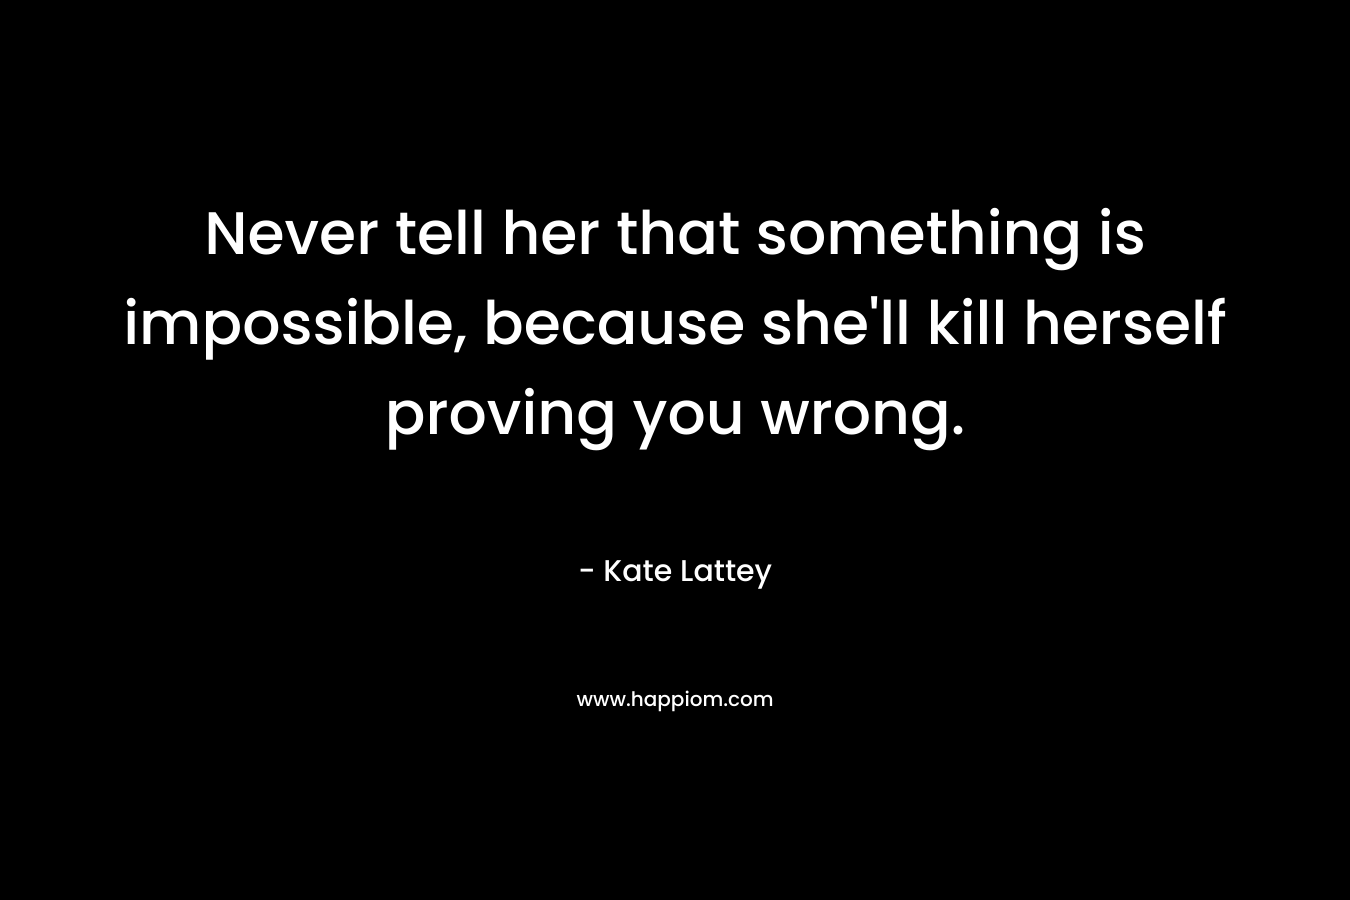 Never tell her that something is impossible, because she'll kill herself proving you wrong.